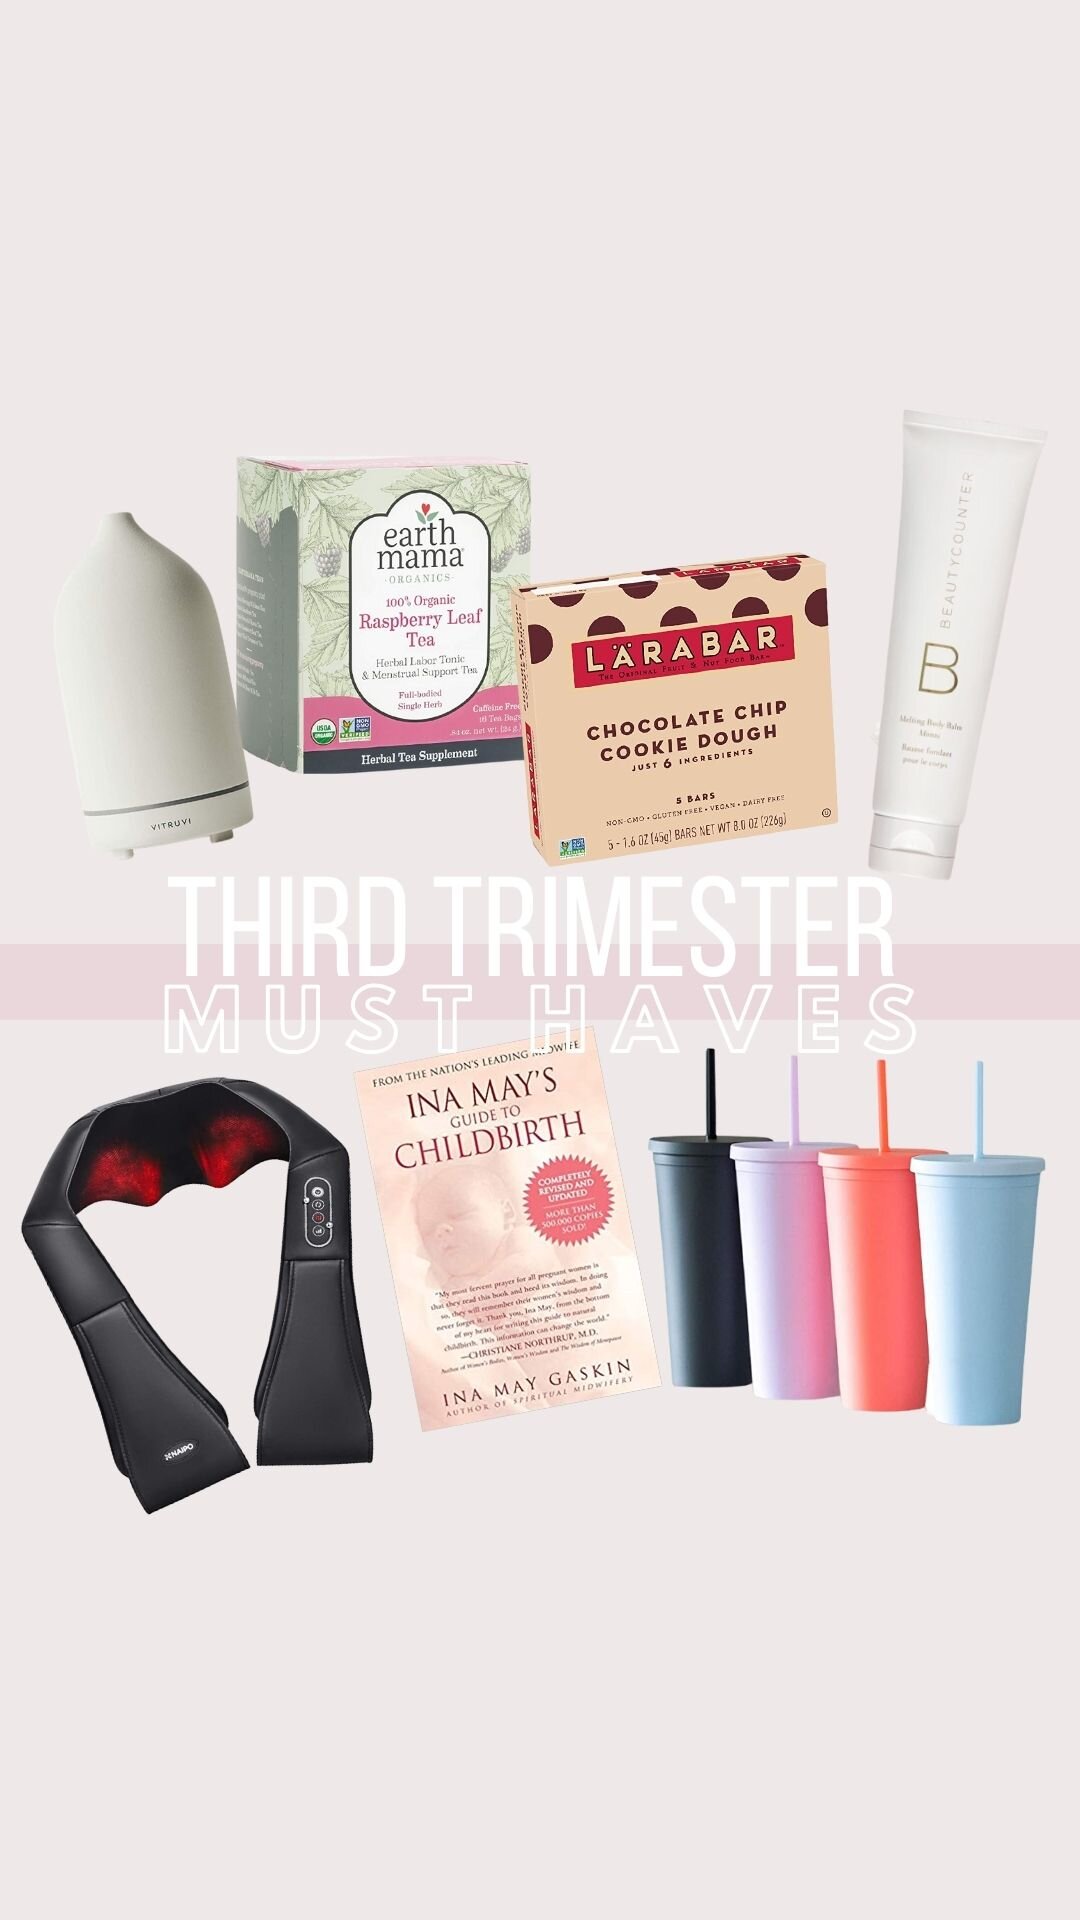 Third Trimester Must Haves